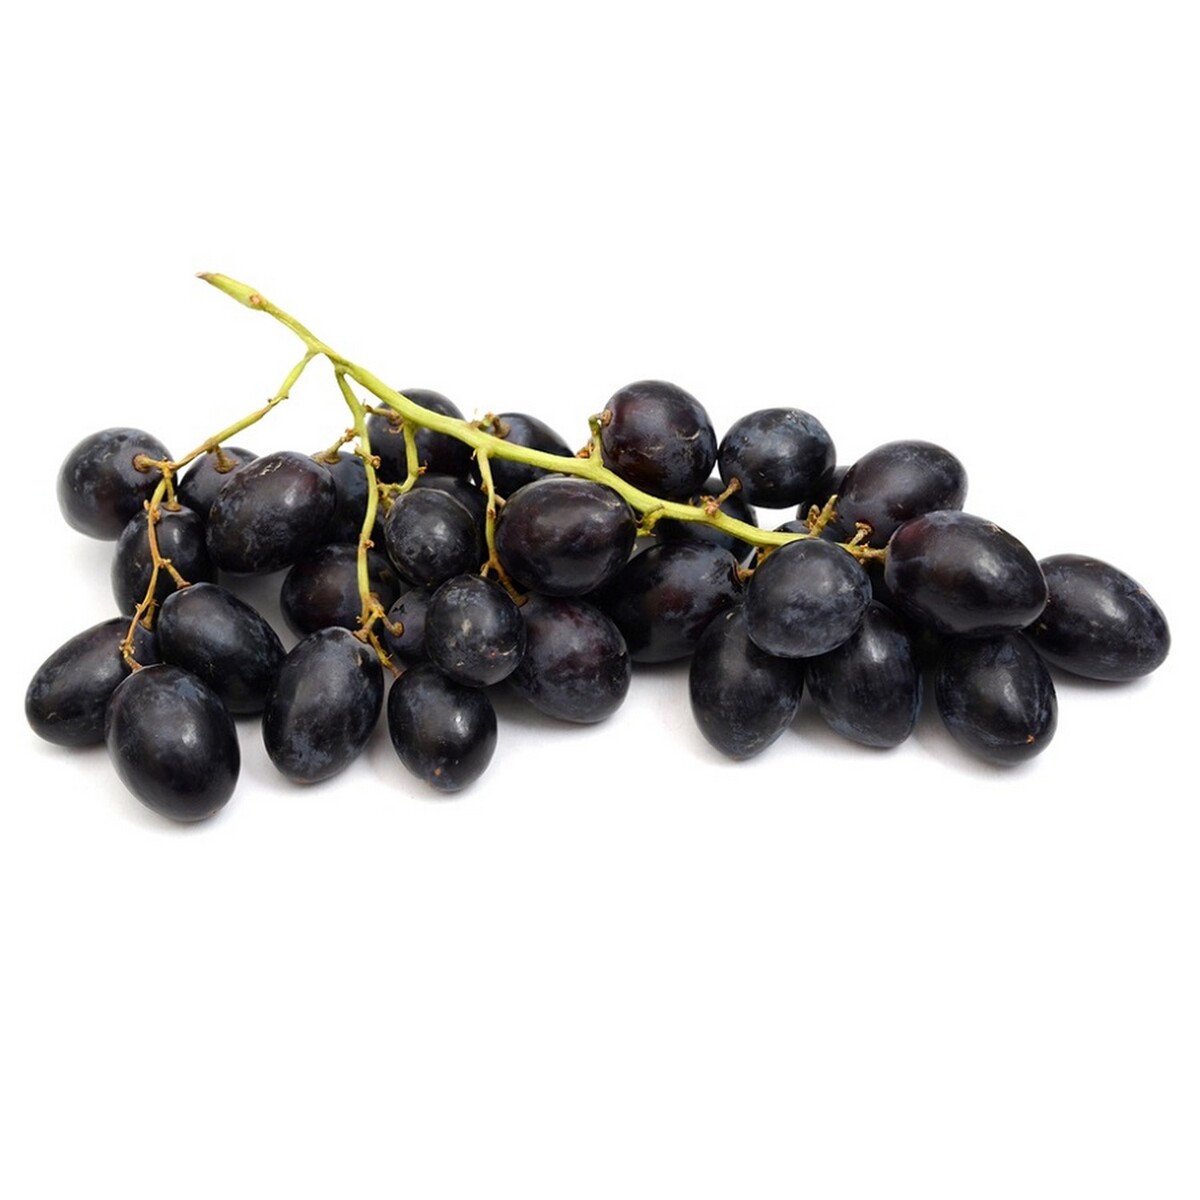 Grapes Black Seedless  approx. 450gm-500gm